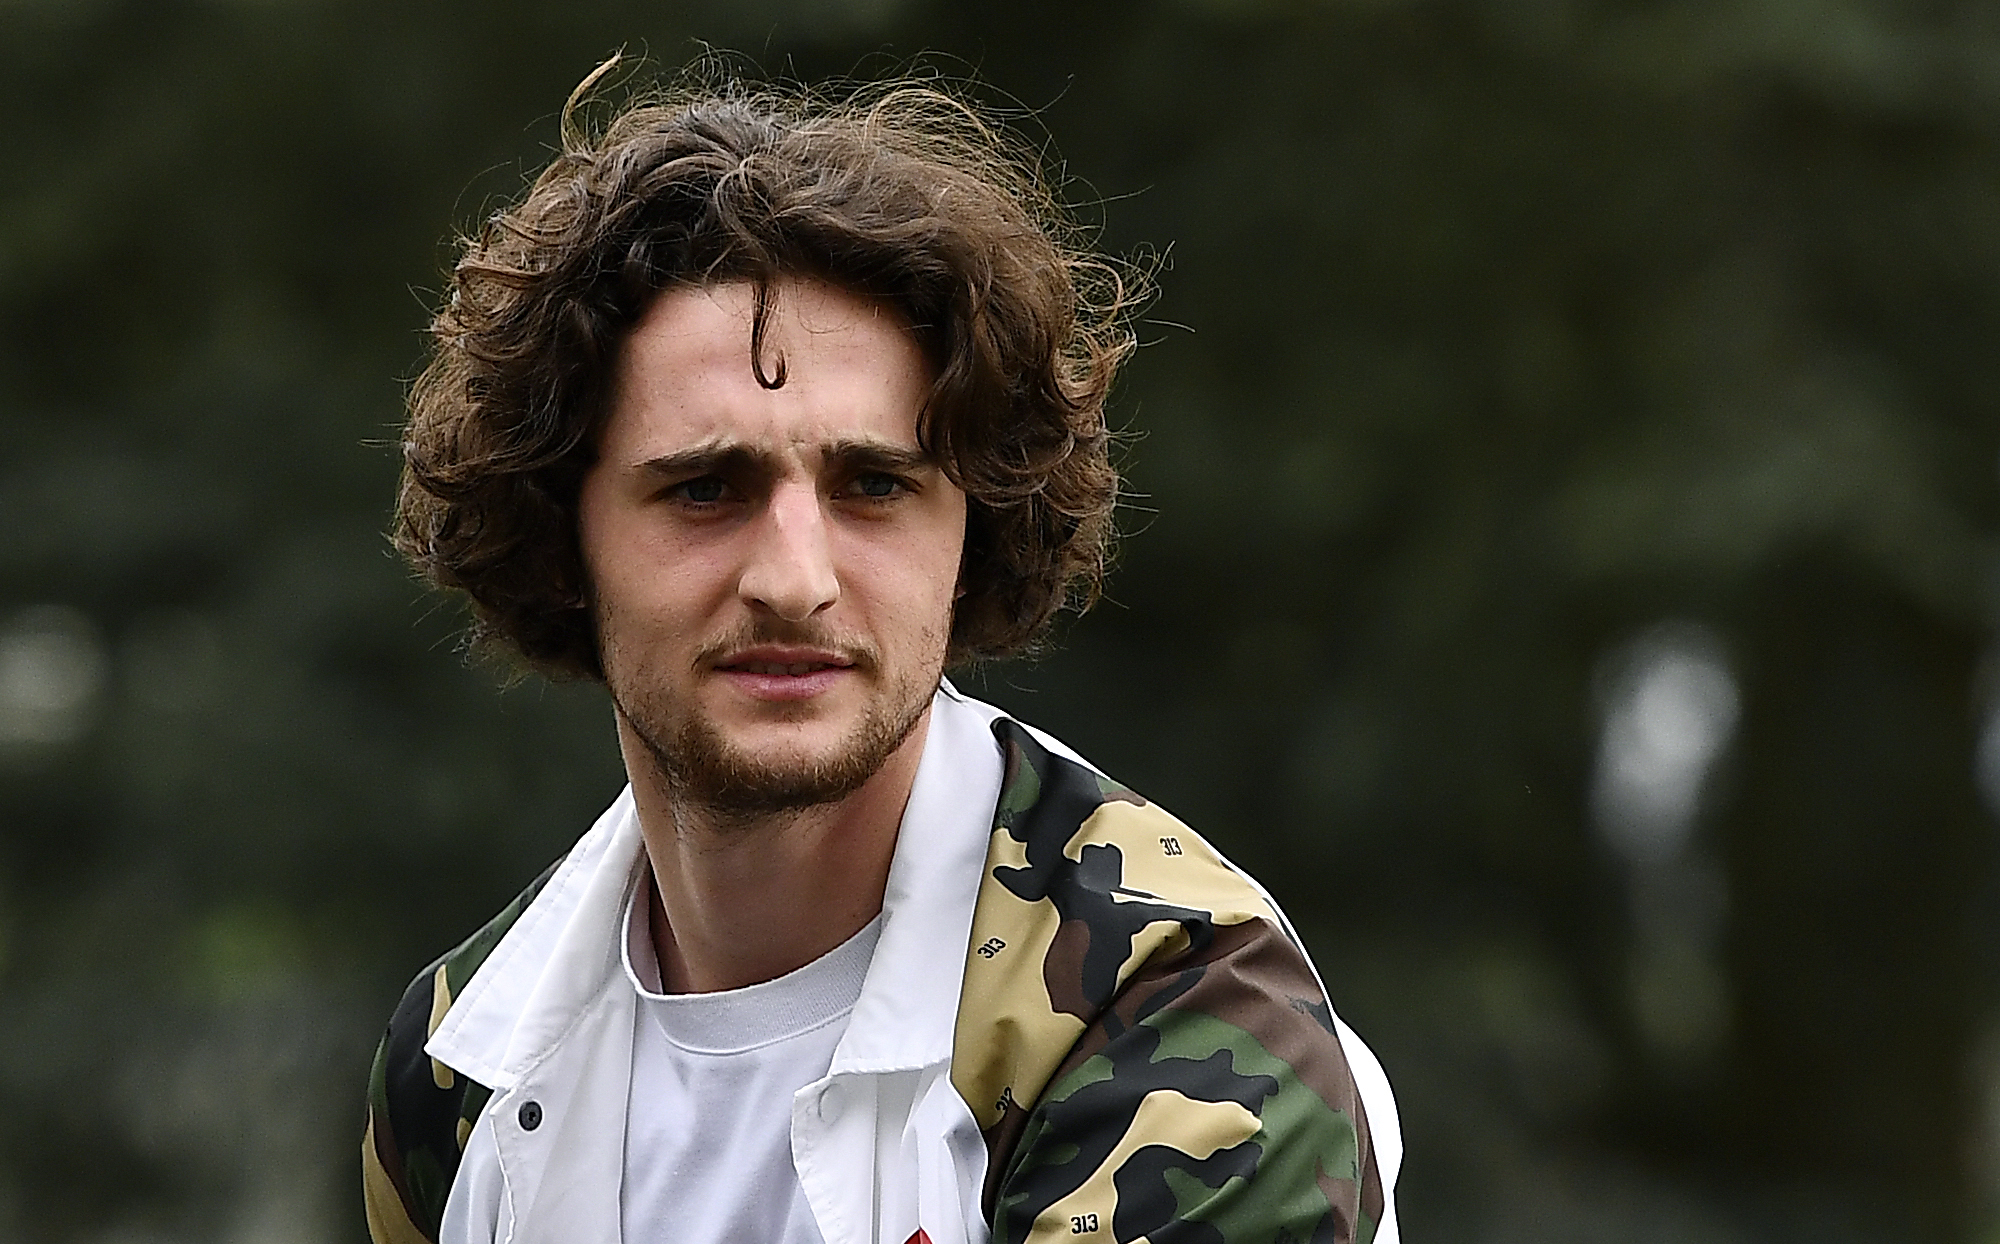 France's midfielder Adrien Rabiot arrives at the French national football team training base in Clairefontaine-en-Yvelines near Paris on March 20, 2017, as part of the team's preparation for the upcoming World Cup 2018 qualifiers.  / AFP PHOTO / FRANCK FIFE        (Photo credit should read FRANCK FIFE/AFP/Getty Images)